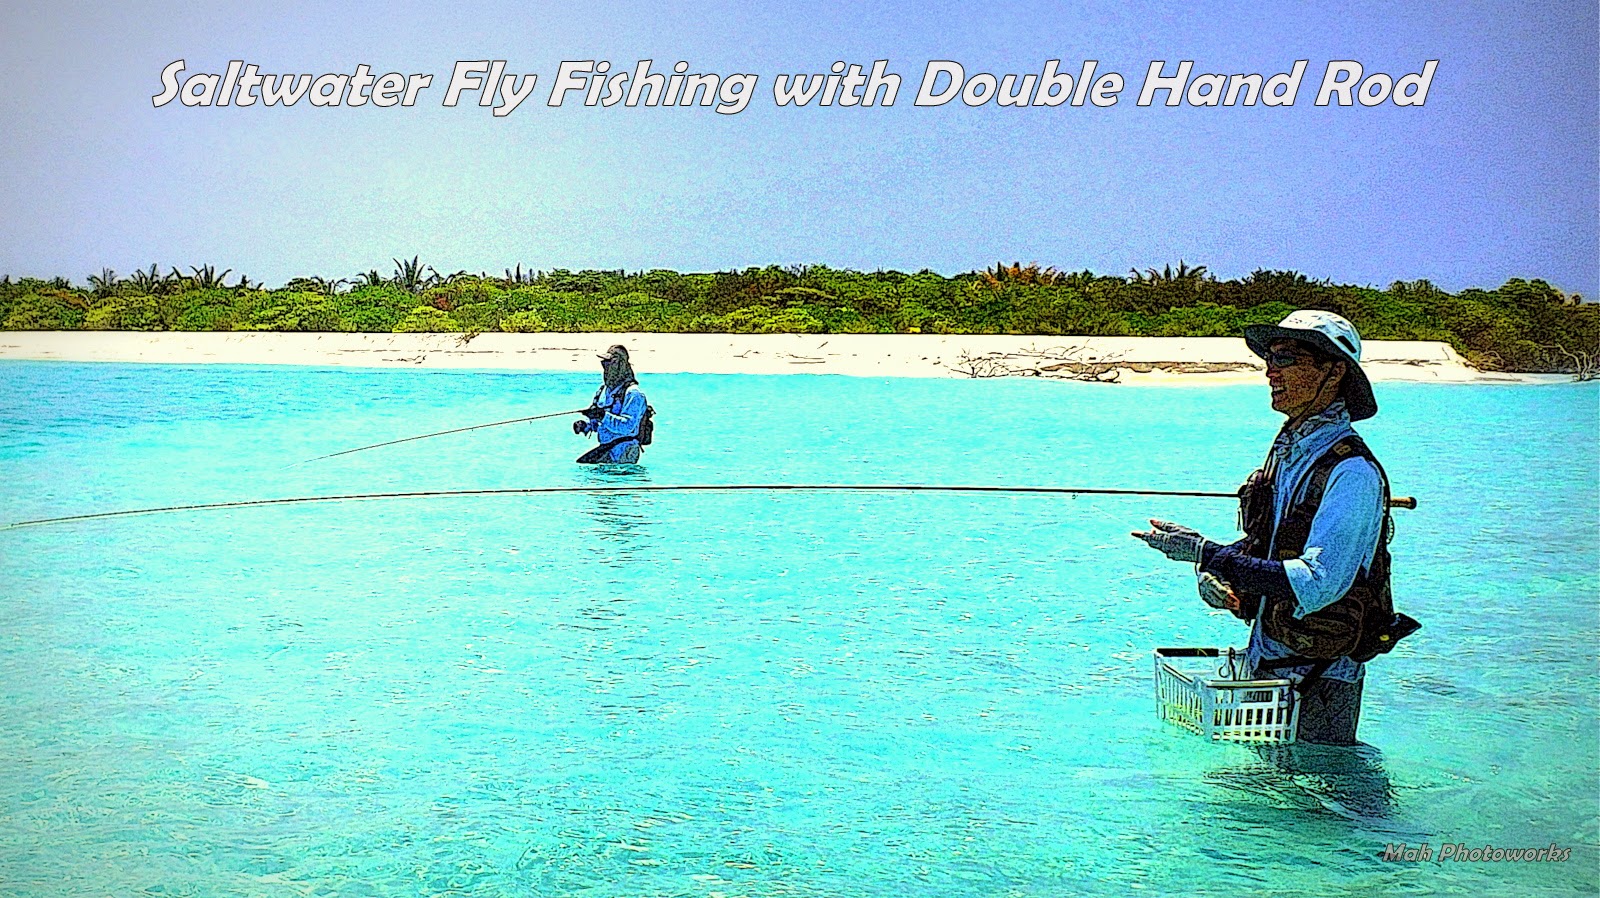 D-Loop Spey Casting: Saltwater Fly Fishing with Double Hand Rod